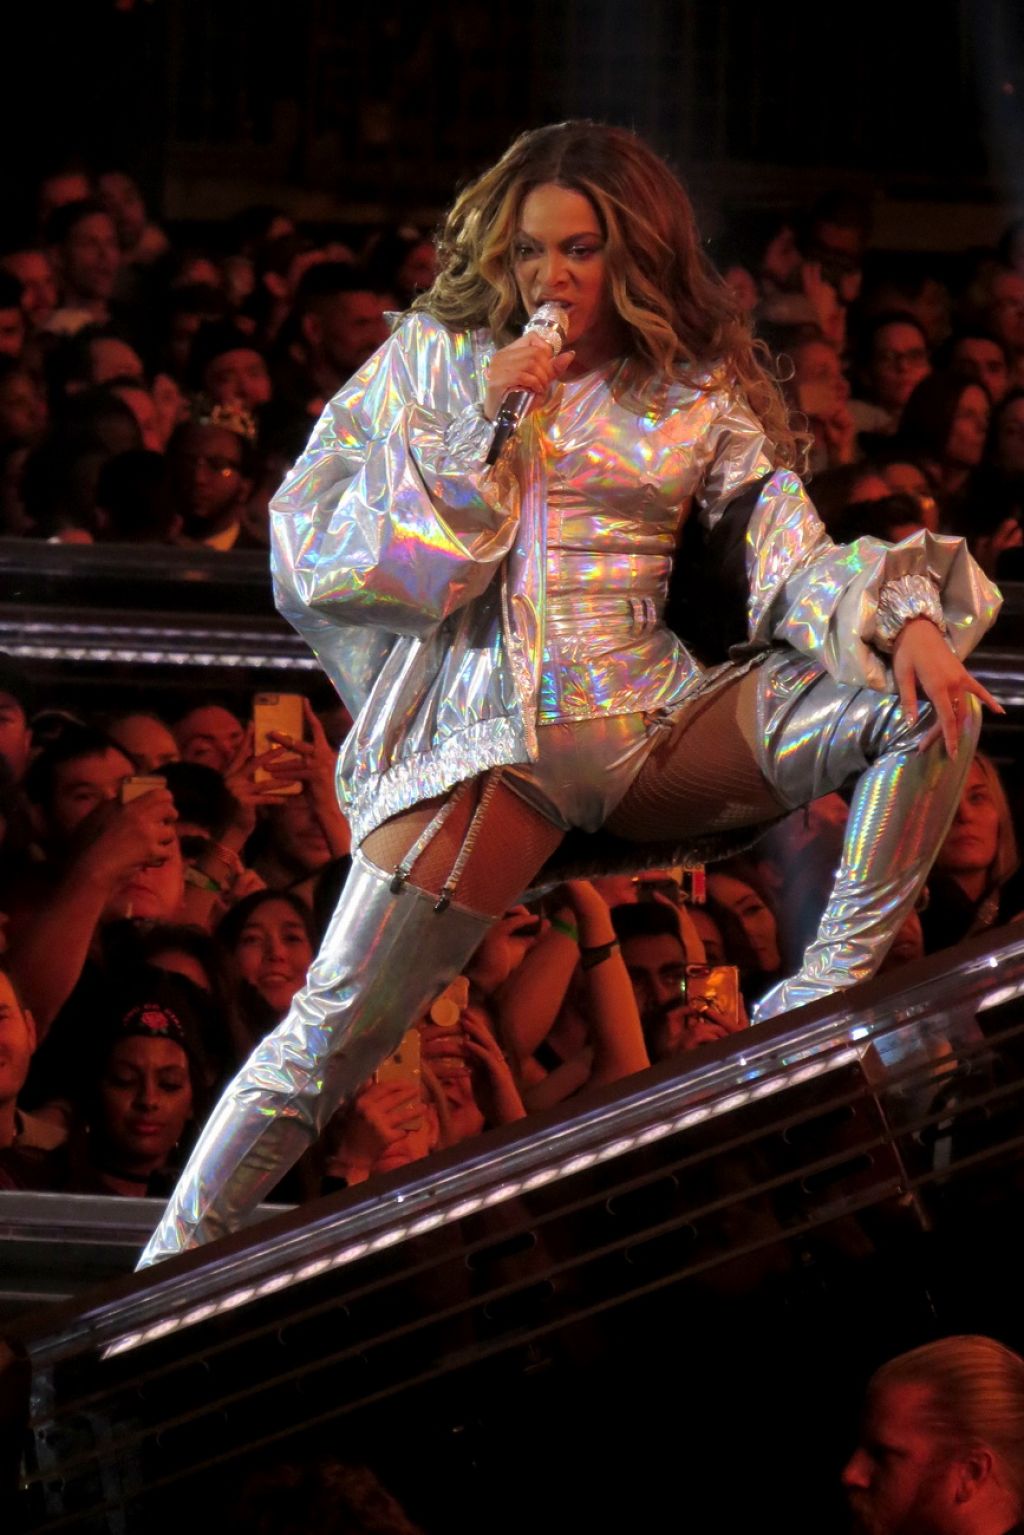 beyonce on the run tour streaming